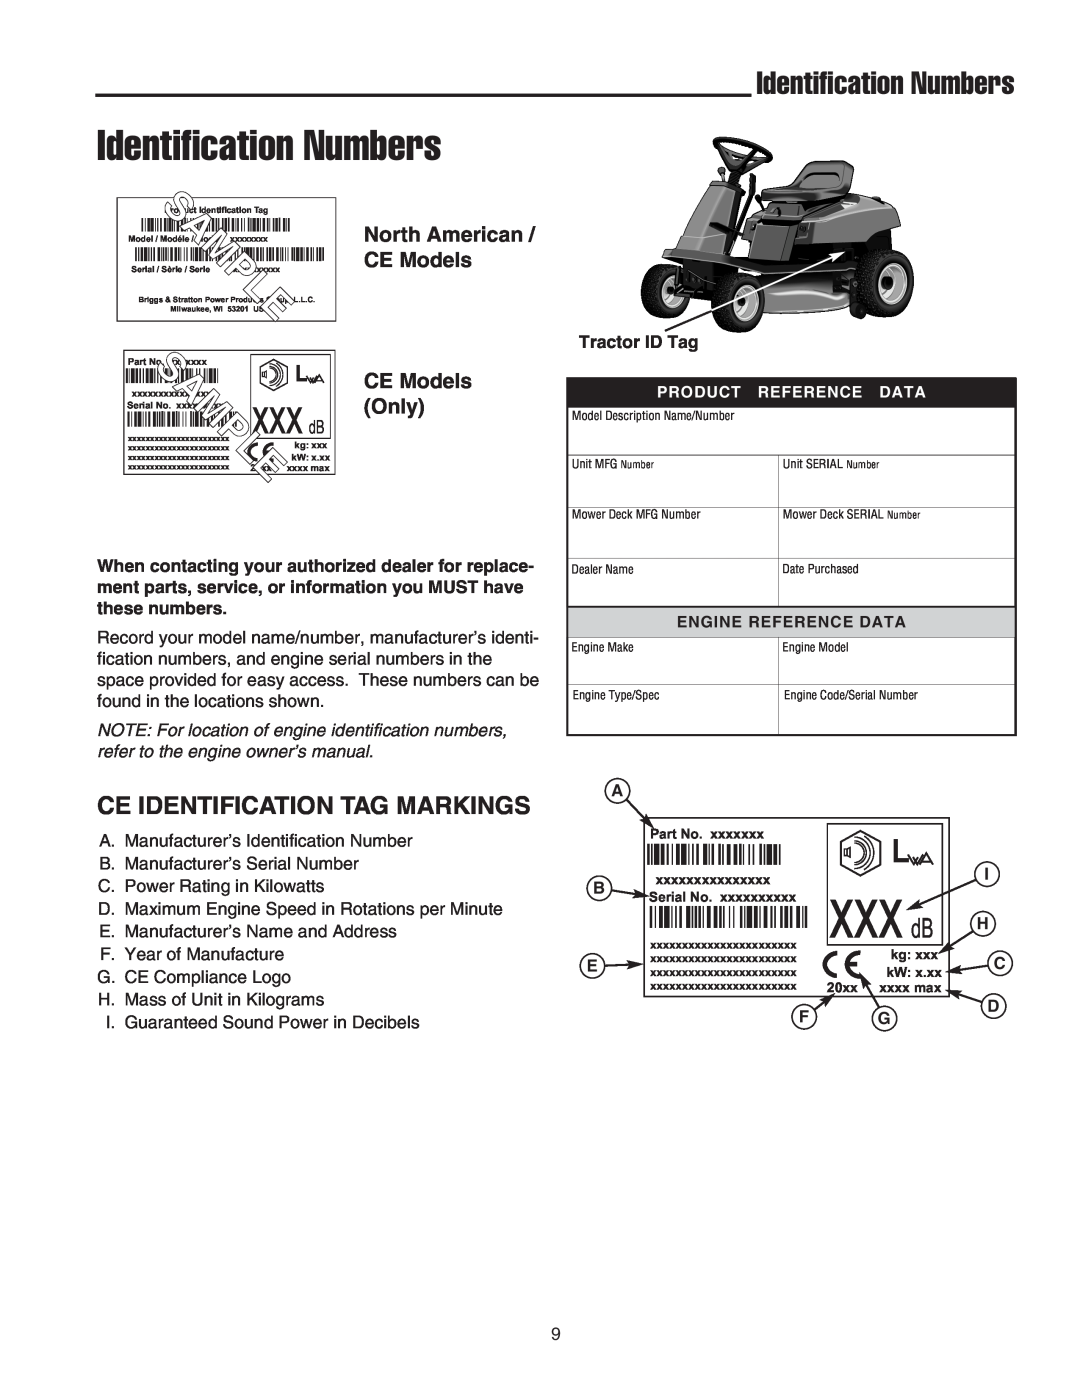 Snapper RE 200 manual Identification Numbers, Ce Identification Tag Markings, xxx dB 